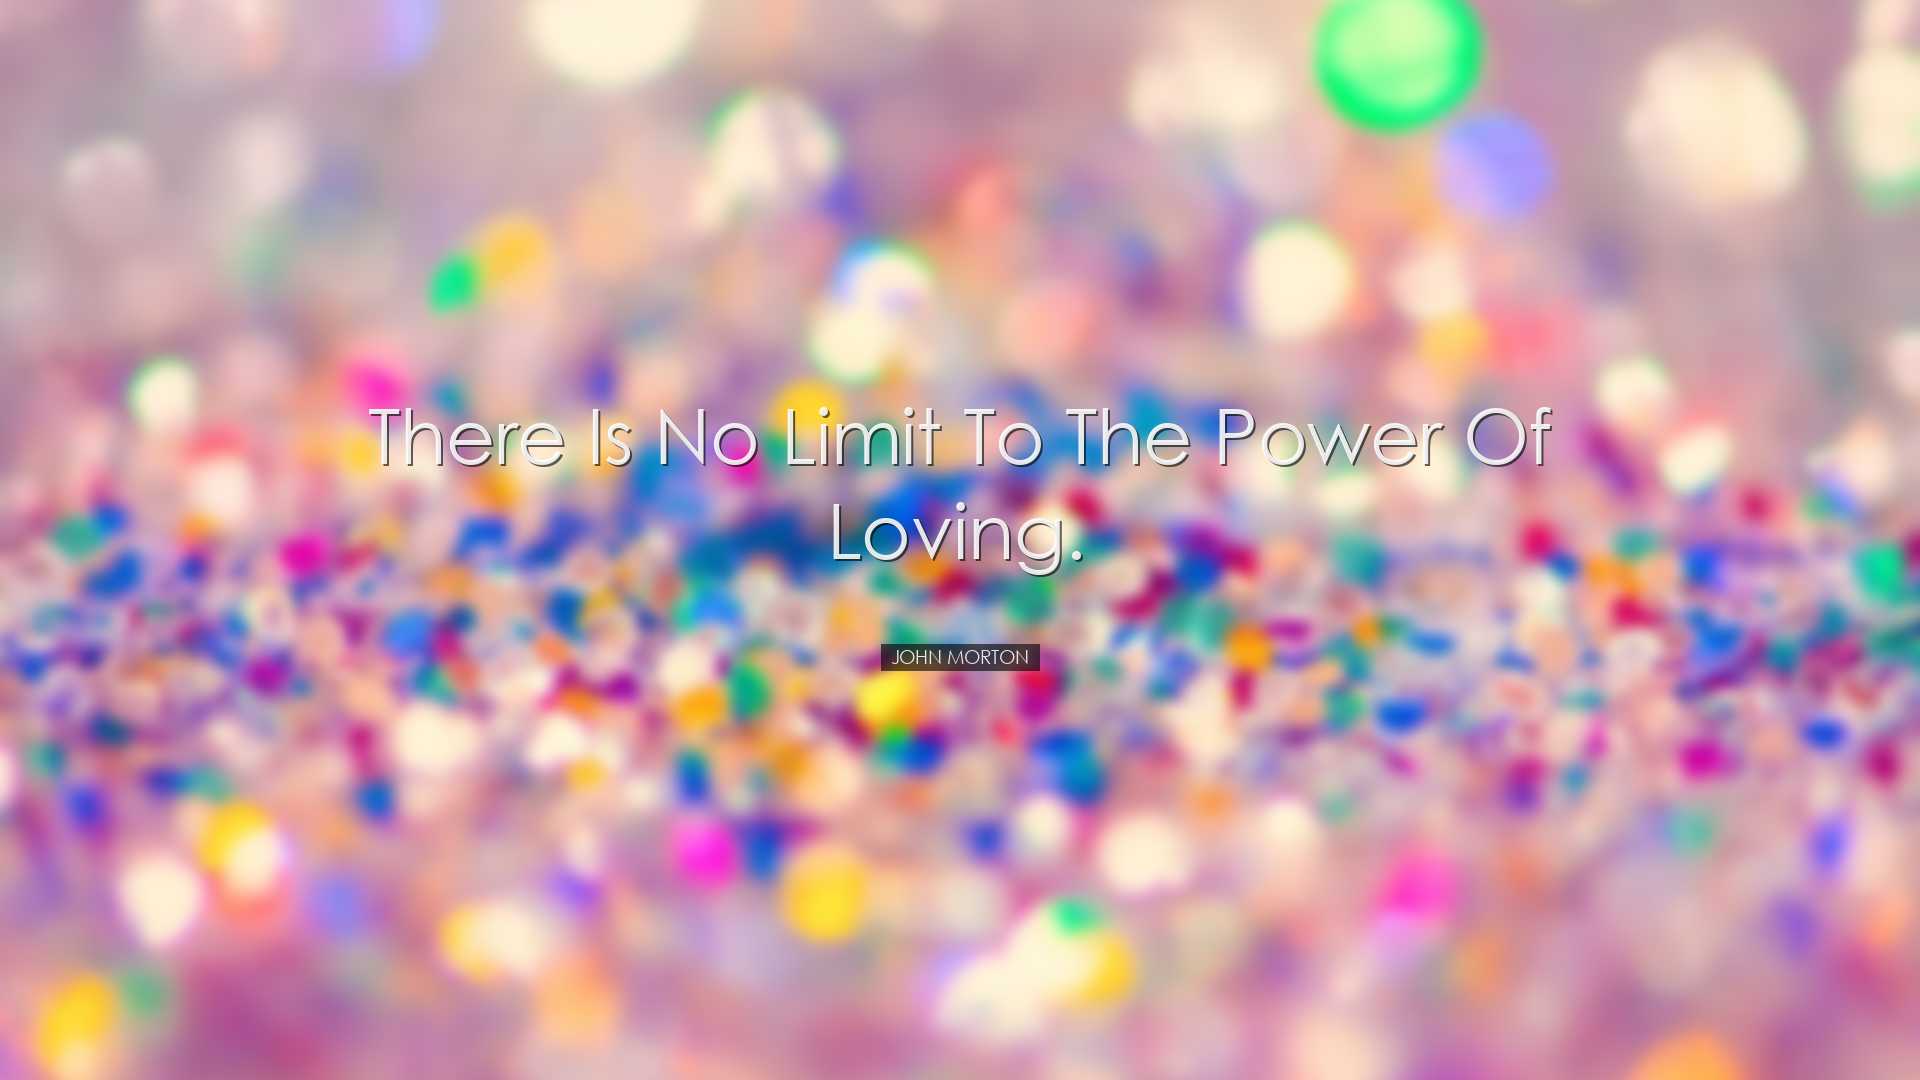 There is no limit to the power of loving. - John Morton